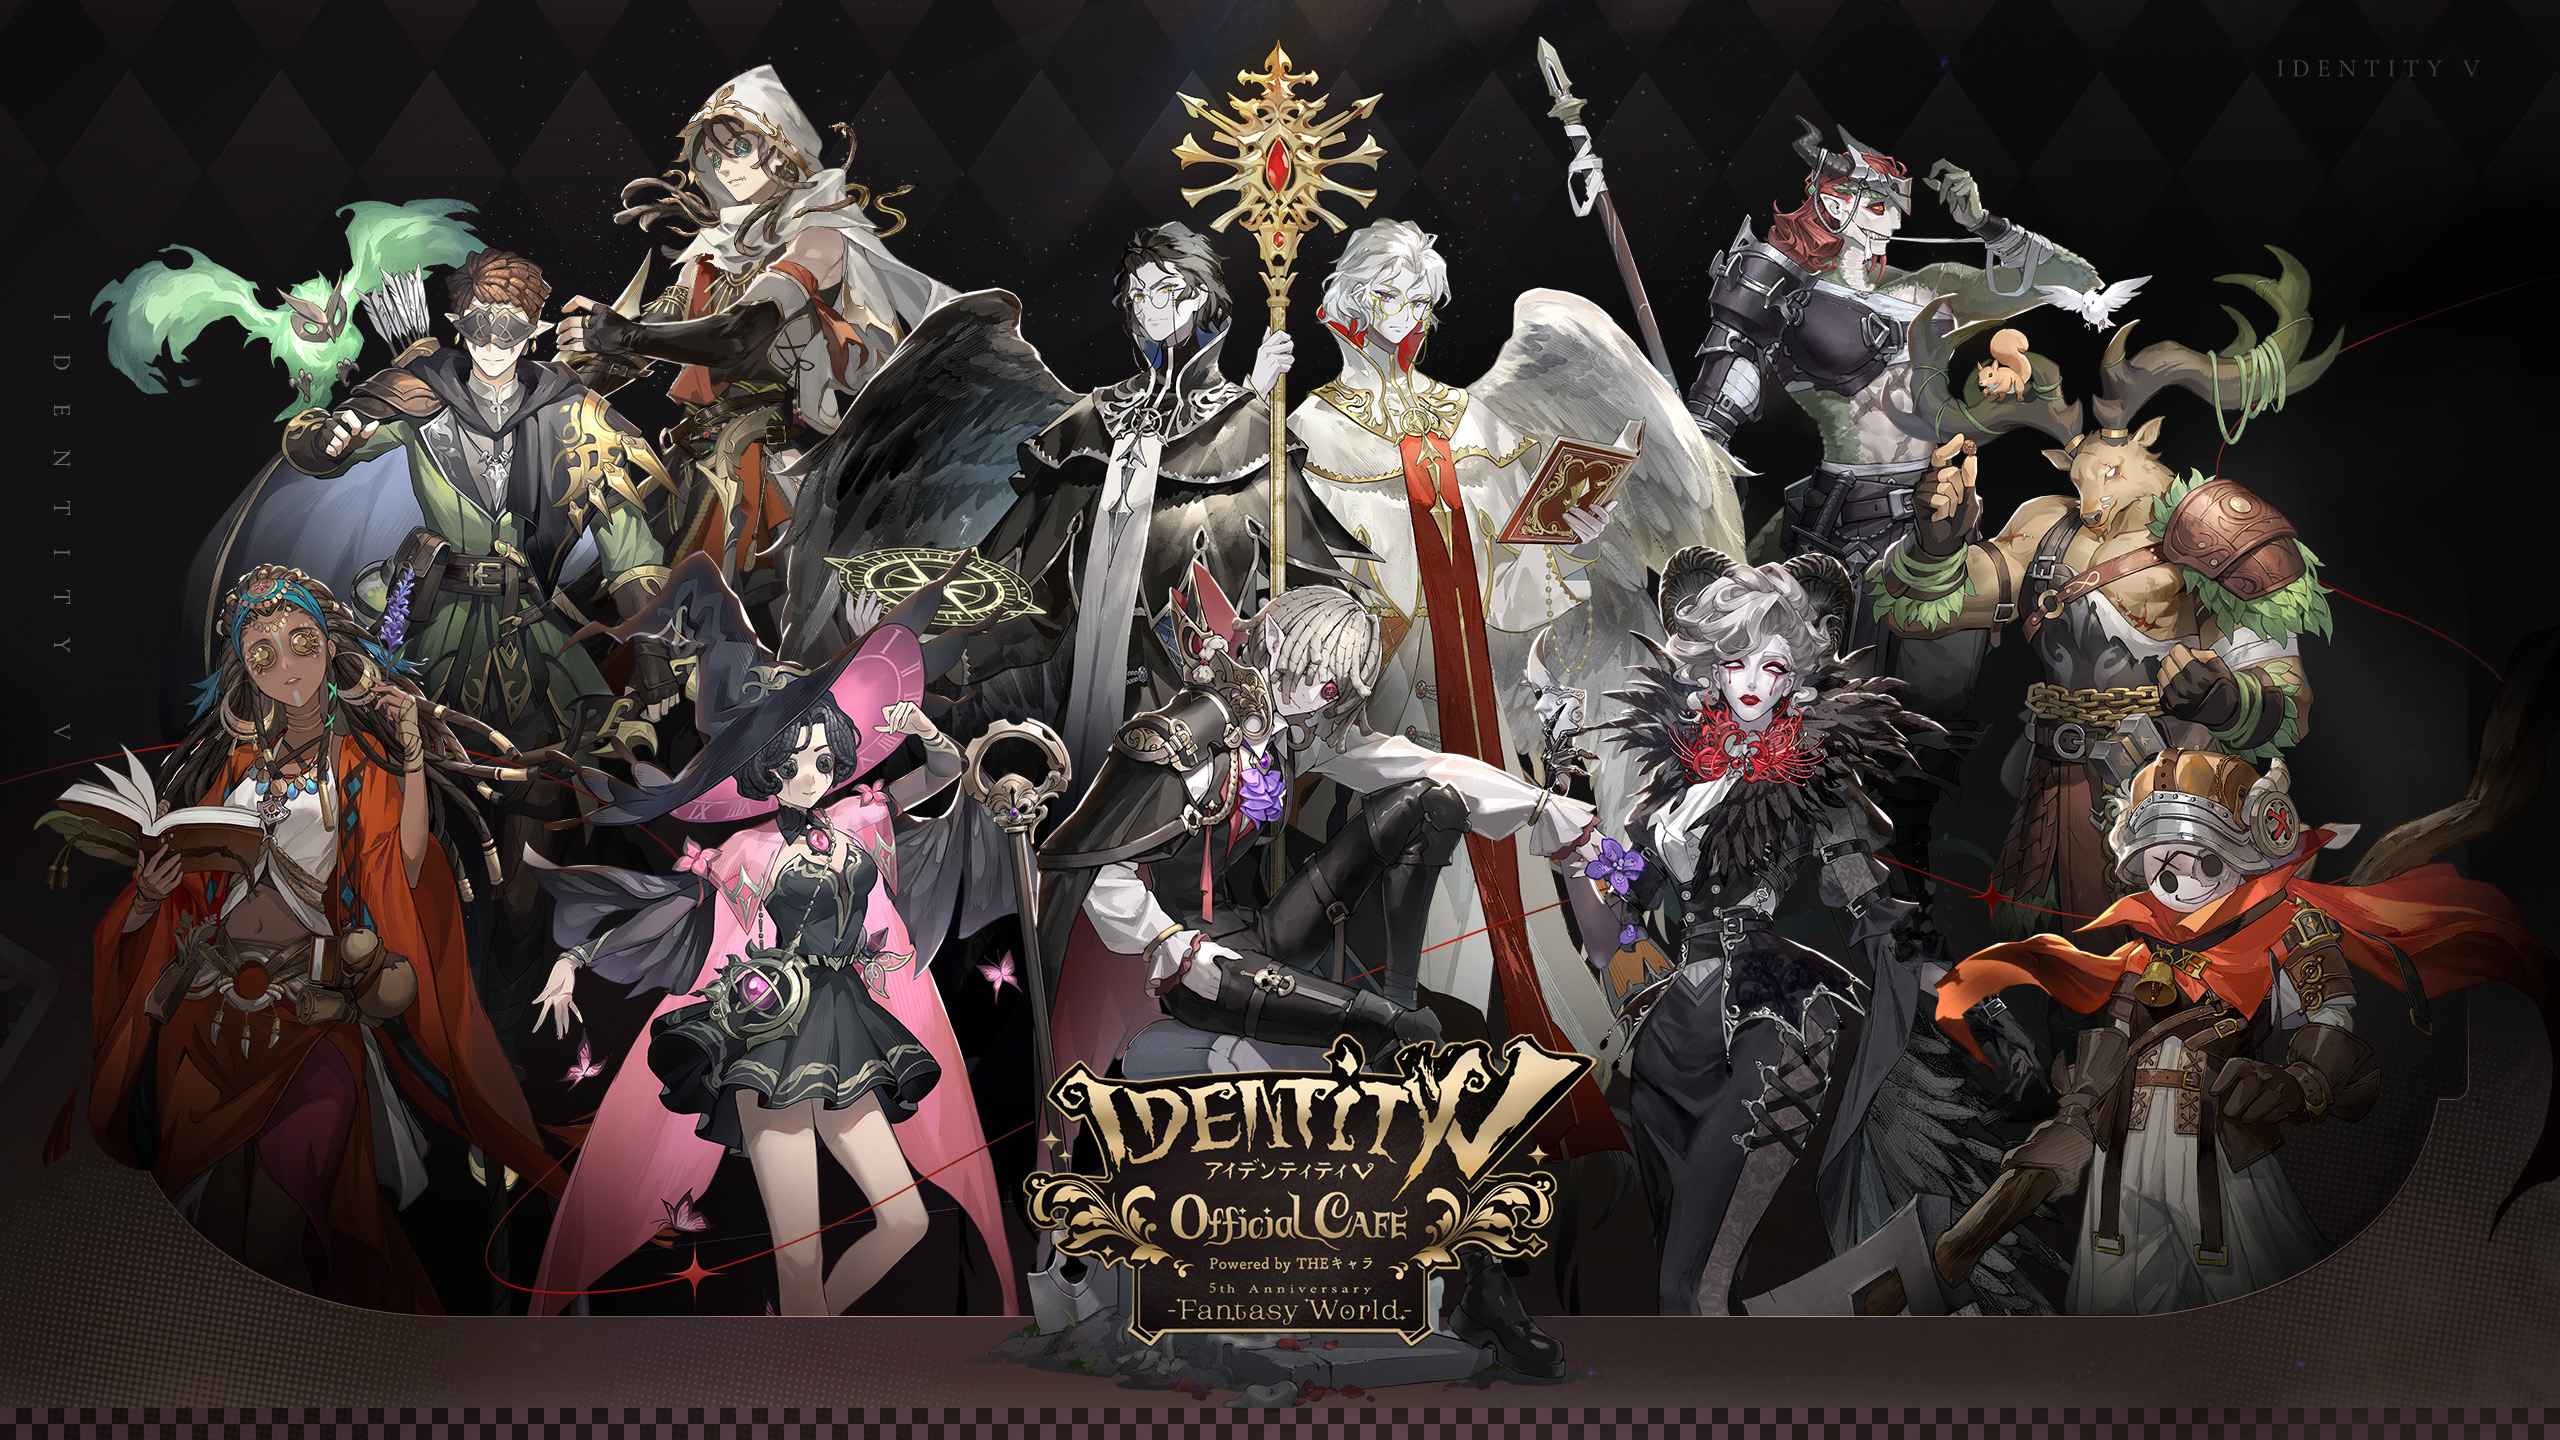 IdentityV 第五人格 Official CAFE ～Fantasy World ver.～ | 【THE